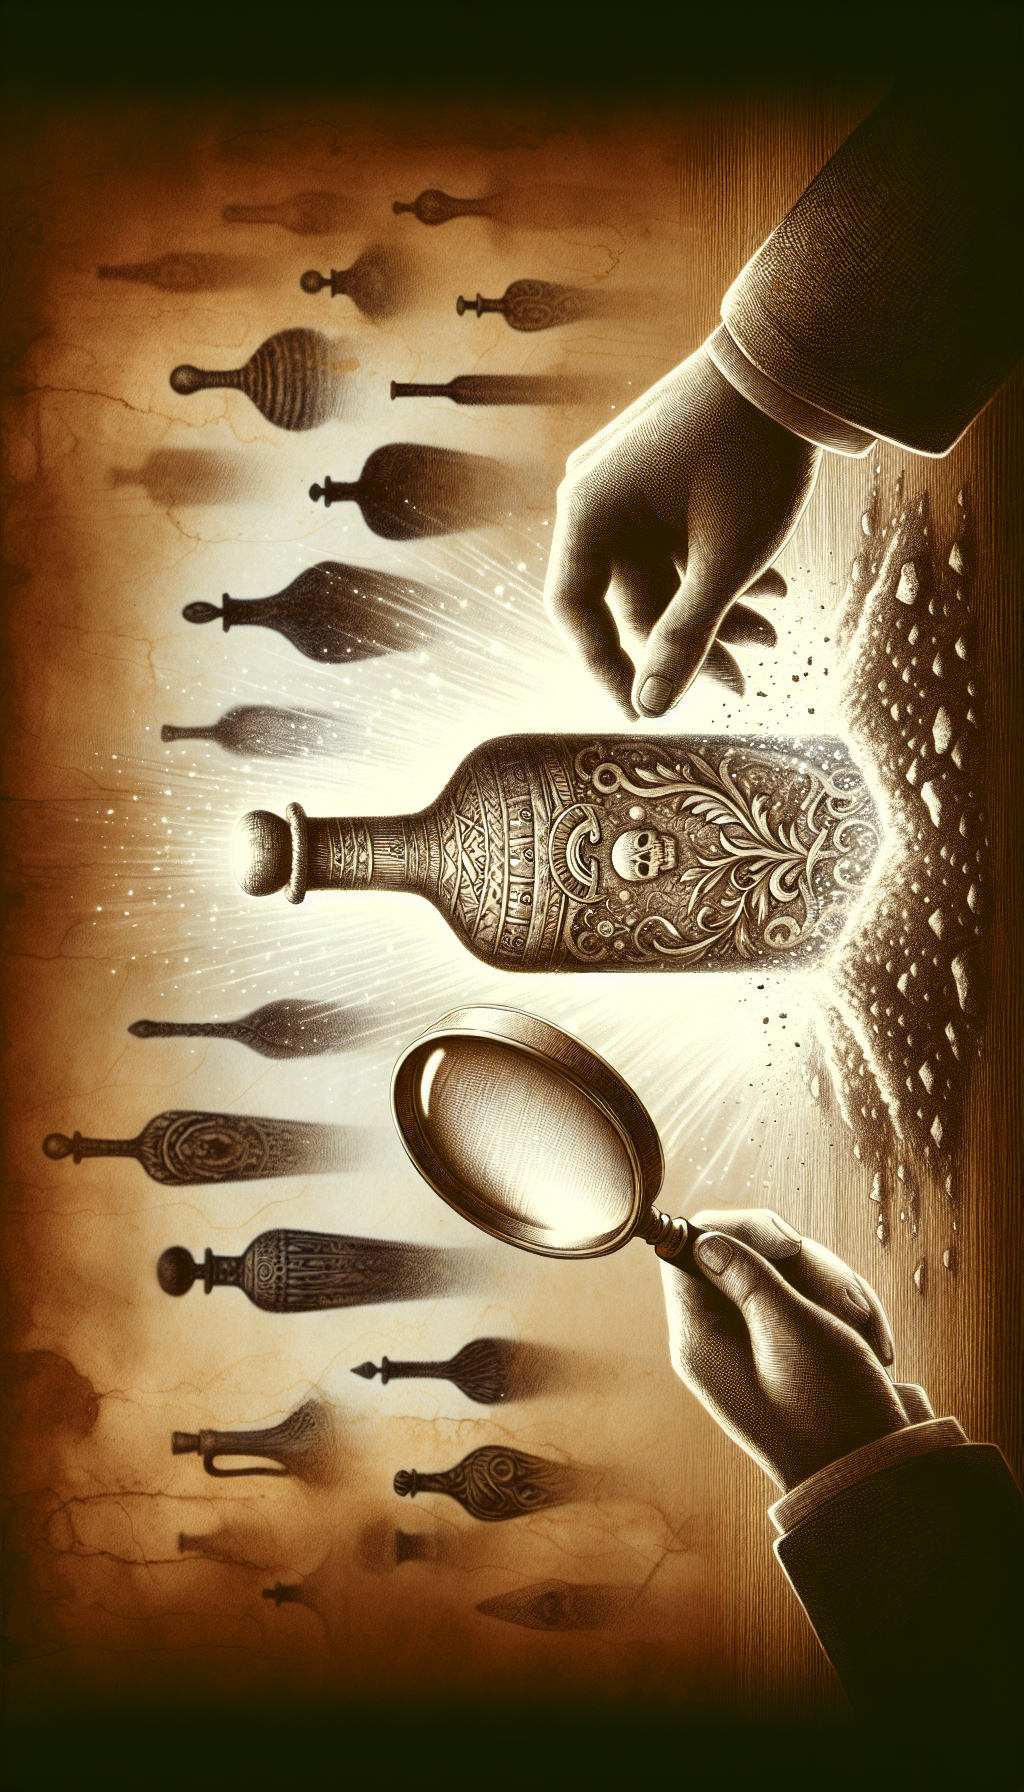 A sepia-toned sketch illustrates a hand dusting off an ancient, ornate bottle buried in the earth, with a gleaming aura emanating from it, symbolizing its high value. The background features silhouettes of rare bottles floating like treasures, with a magnifying glass focusing on one, hinting at the collector's quest to discover the past and the value within.